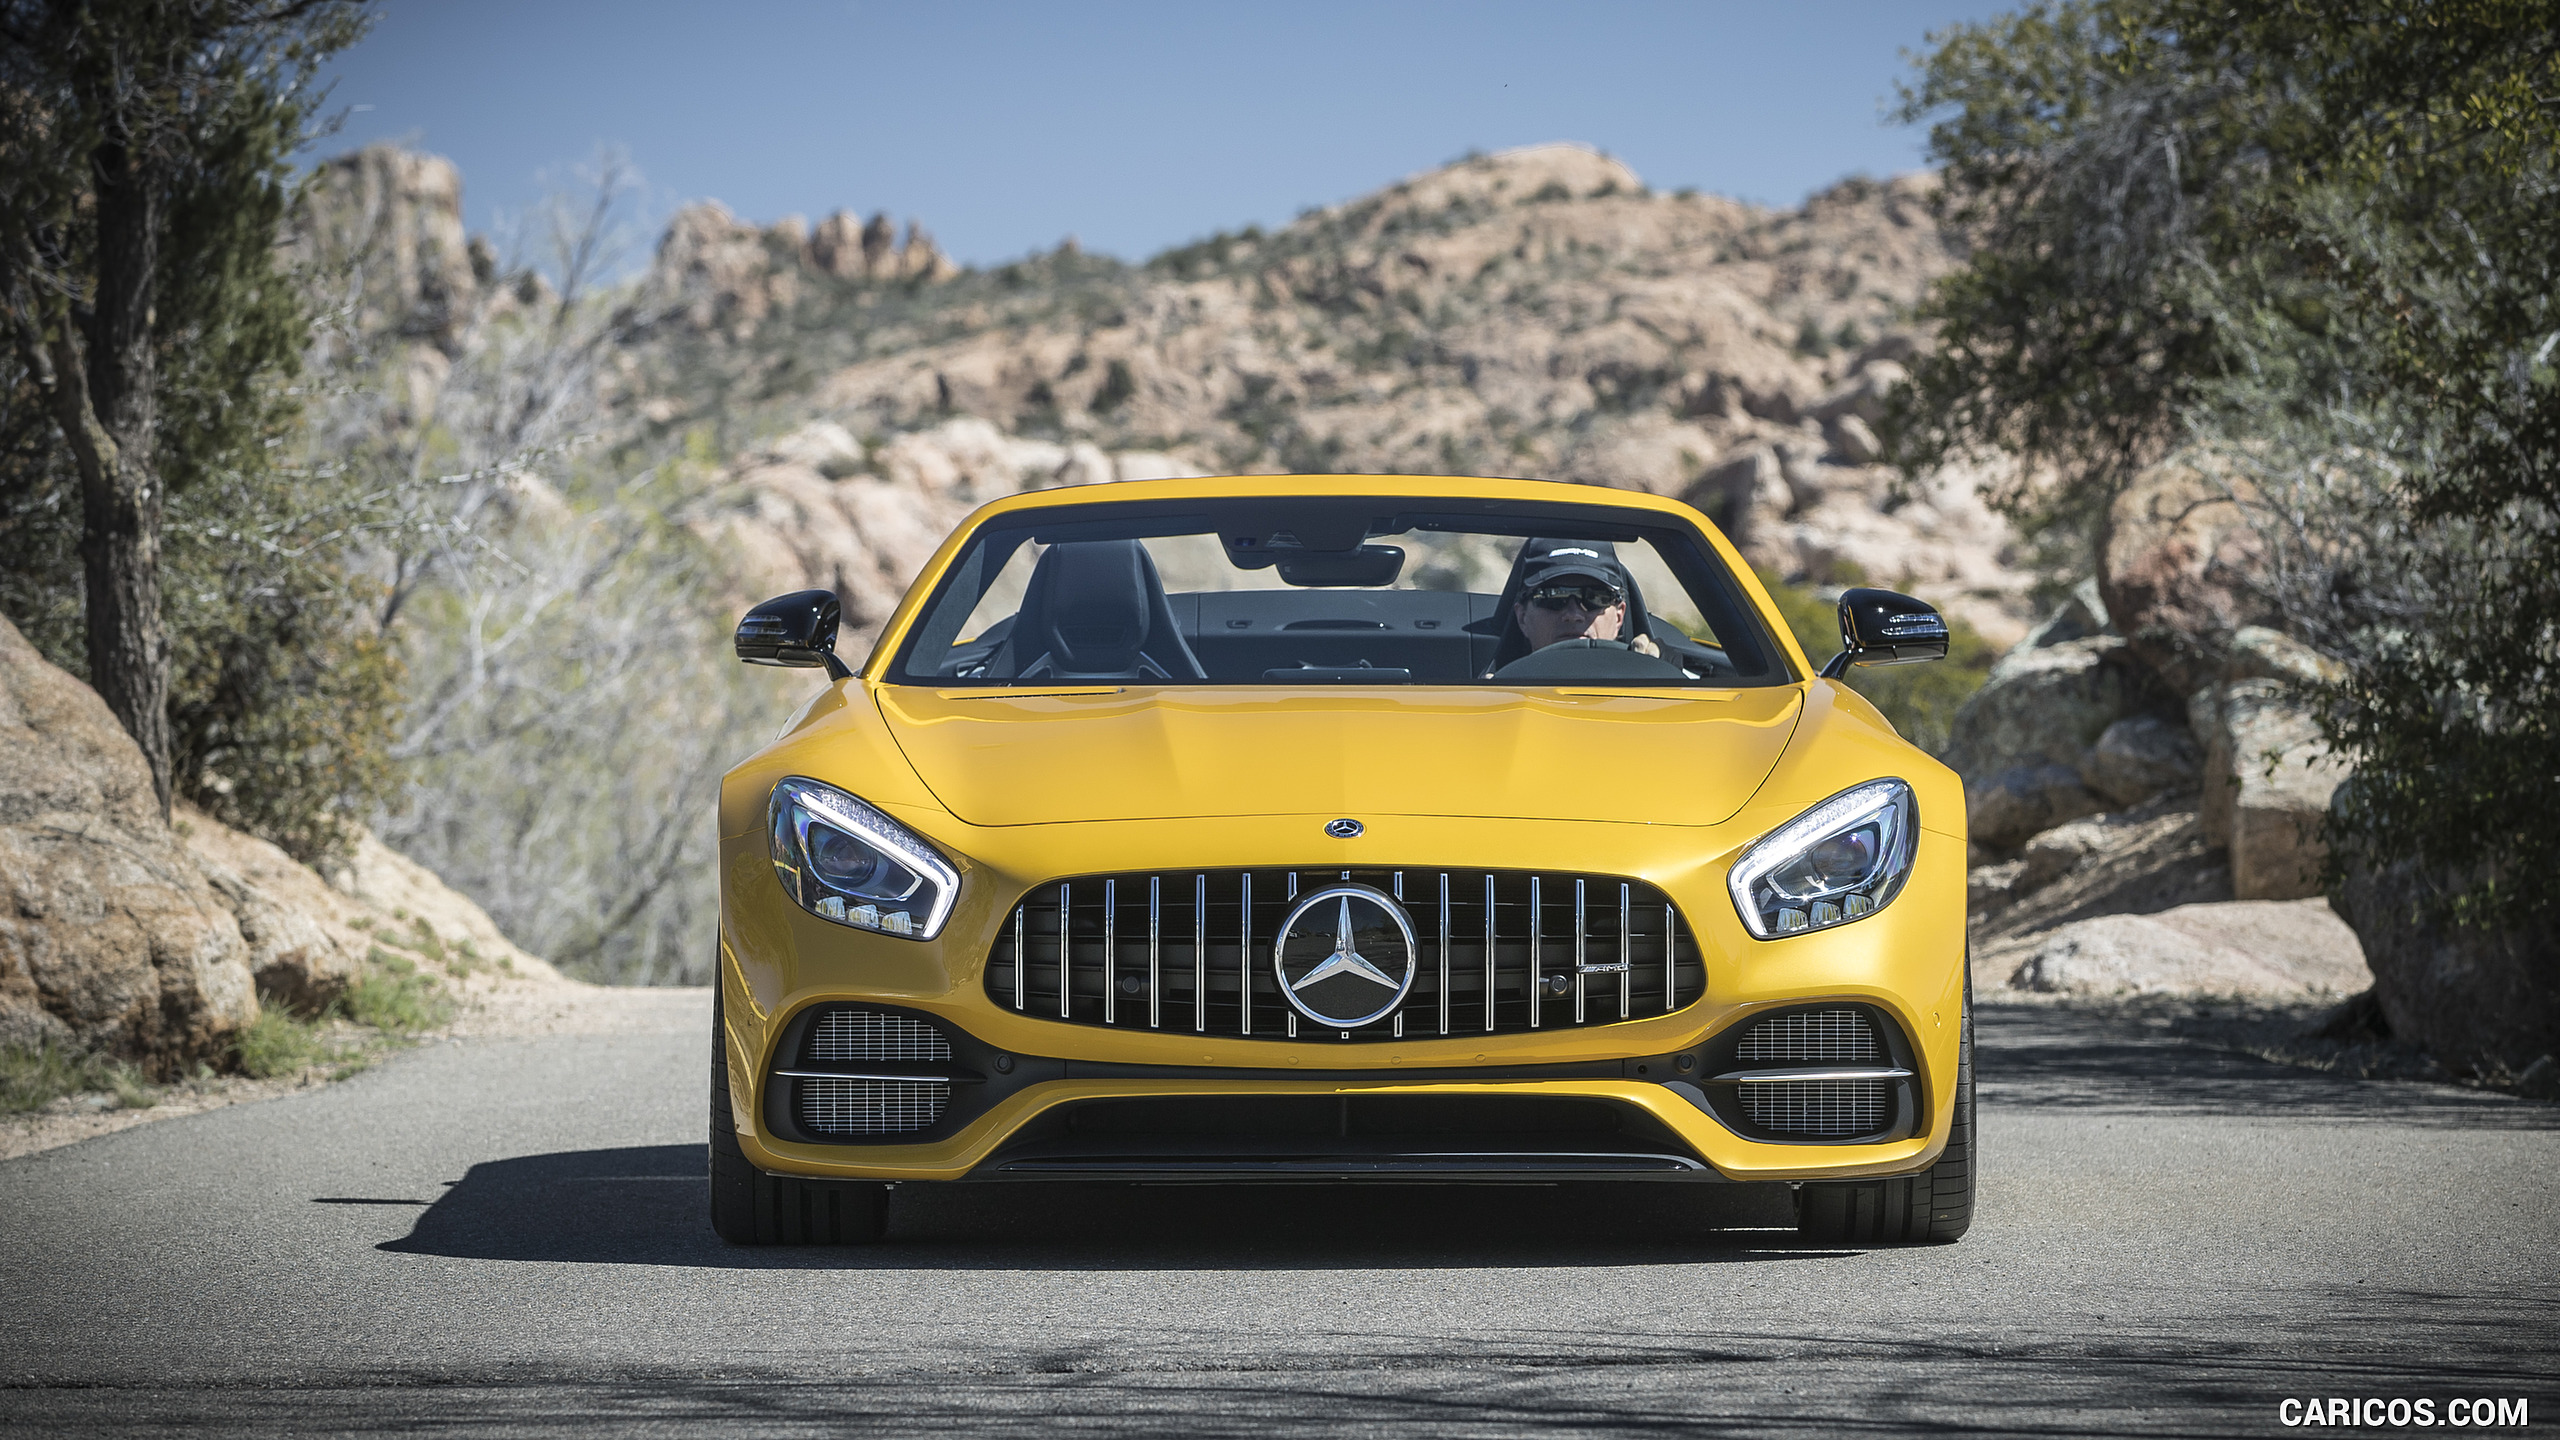 2018 Mercedes-AMG GT C Roadster - Front, #189 of 350